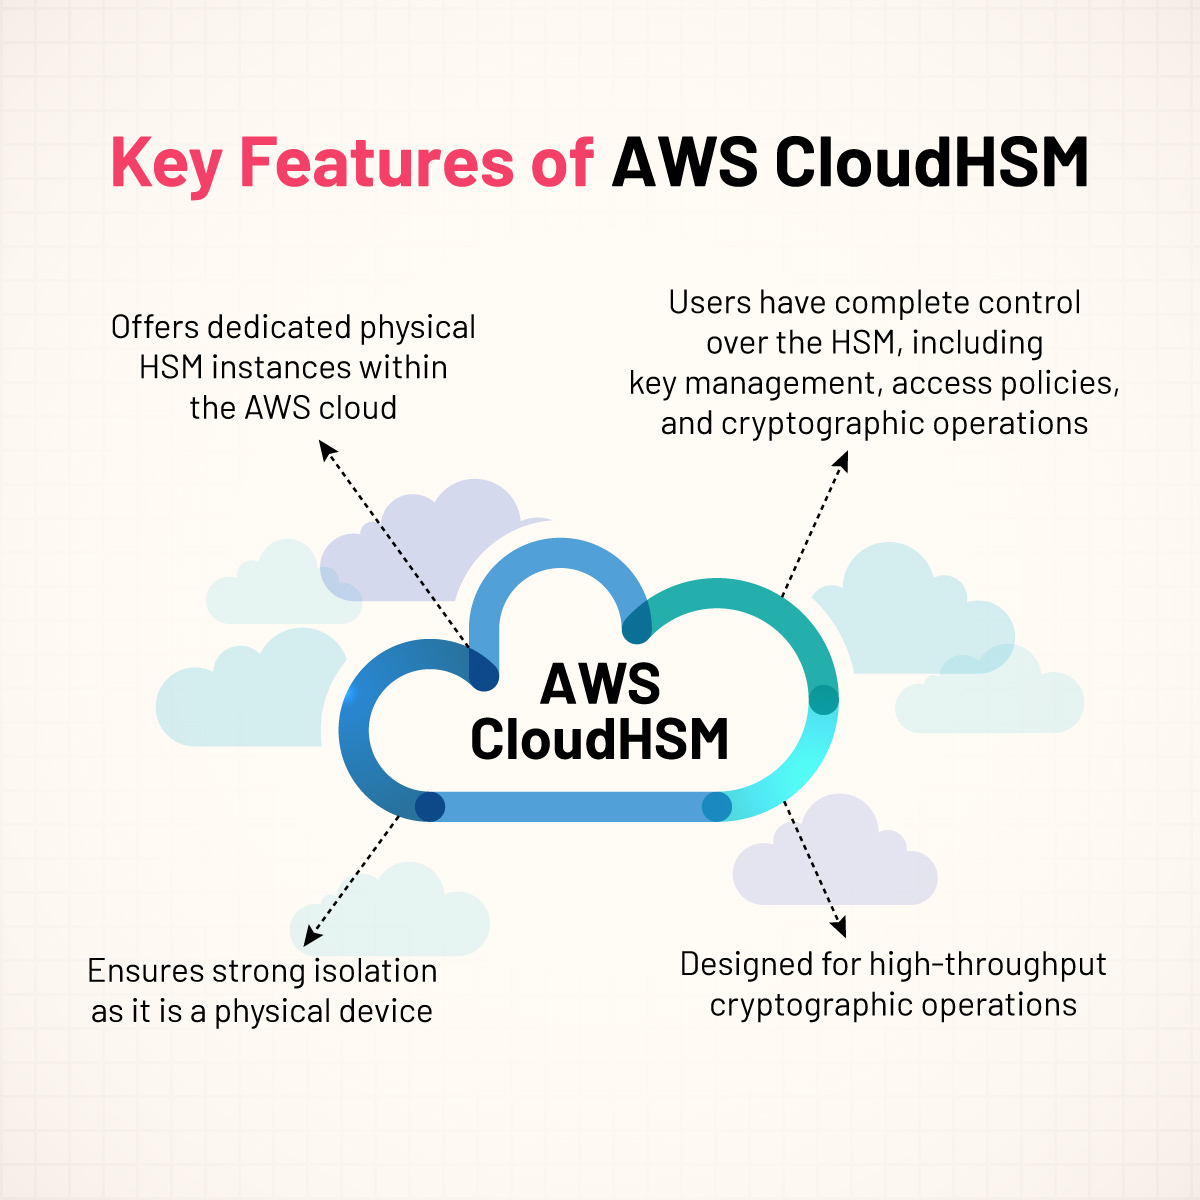 Key Features of AWS CloudHSM